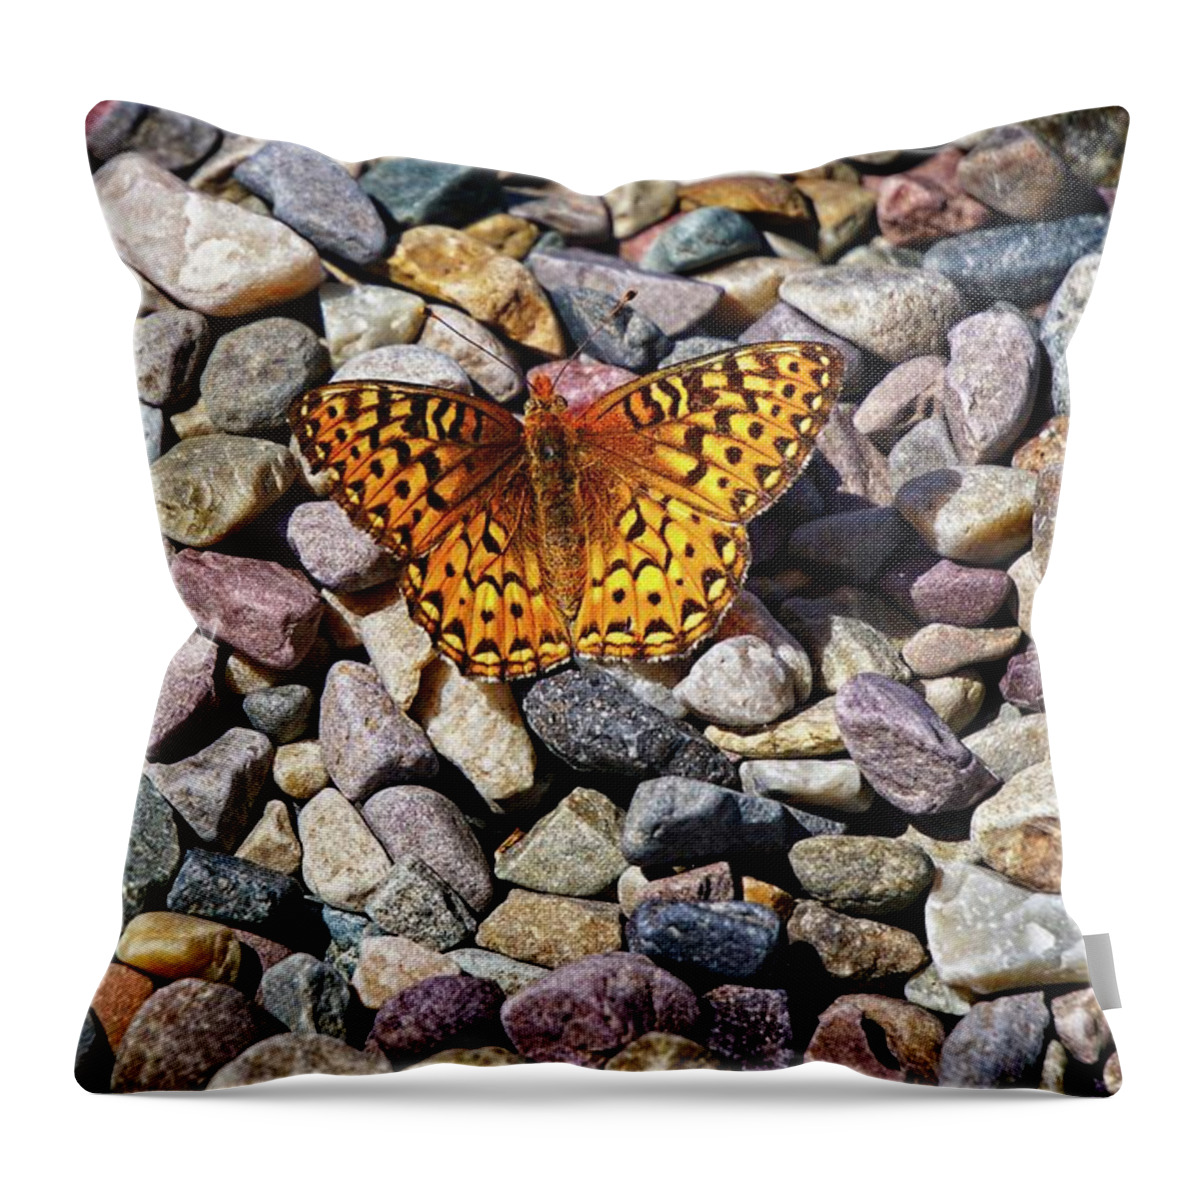 Butterflies Throw Pillow featuring the photograph Orange And Black Butterfly by David Desautel